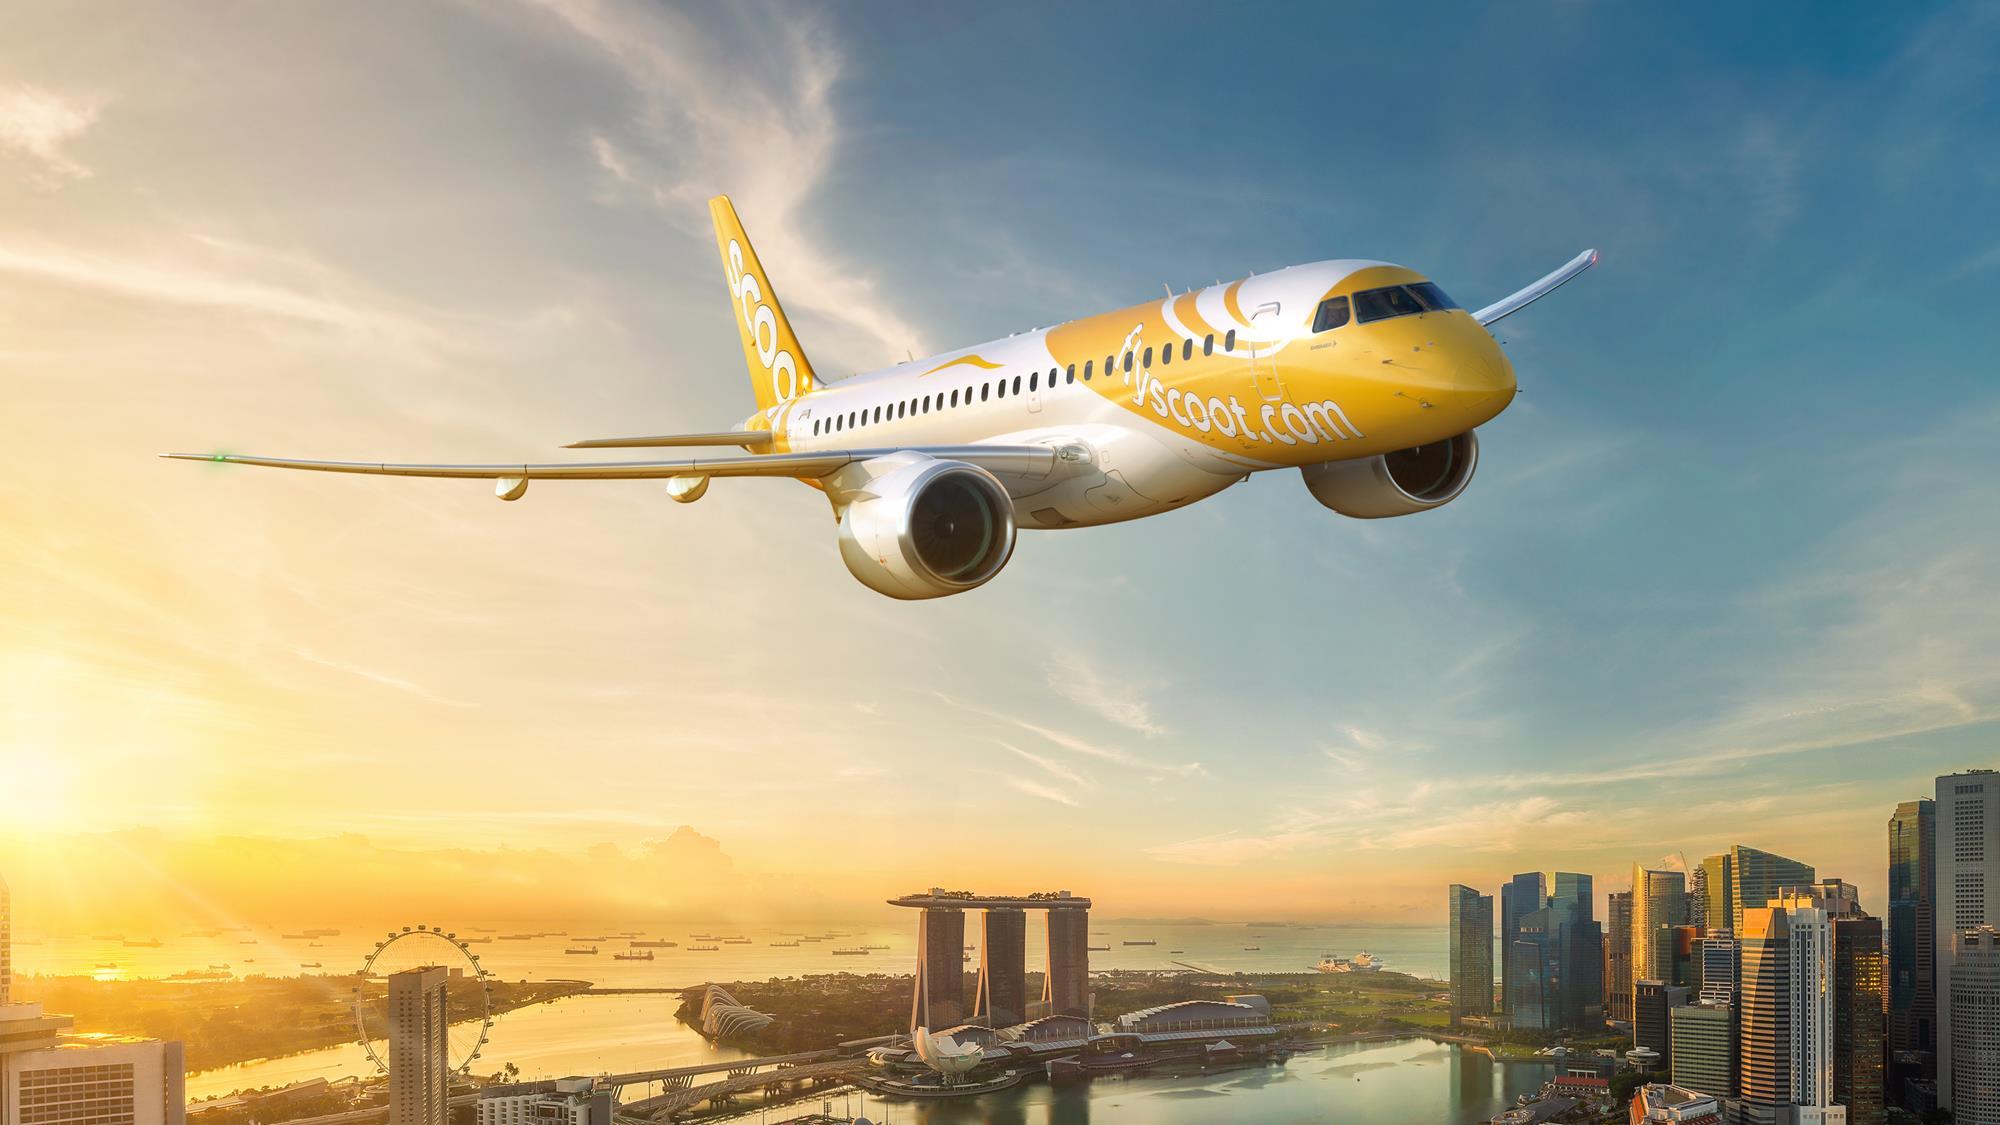 Singaporean low-cost airline company will become first operator of the airplanes Embraer E190-E2 in South-East Asia (SEA)